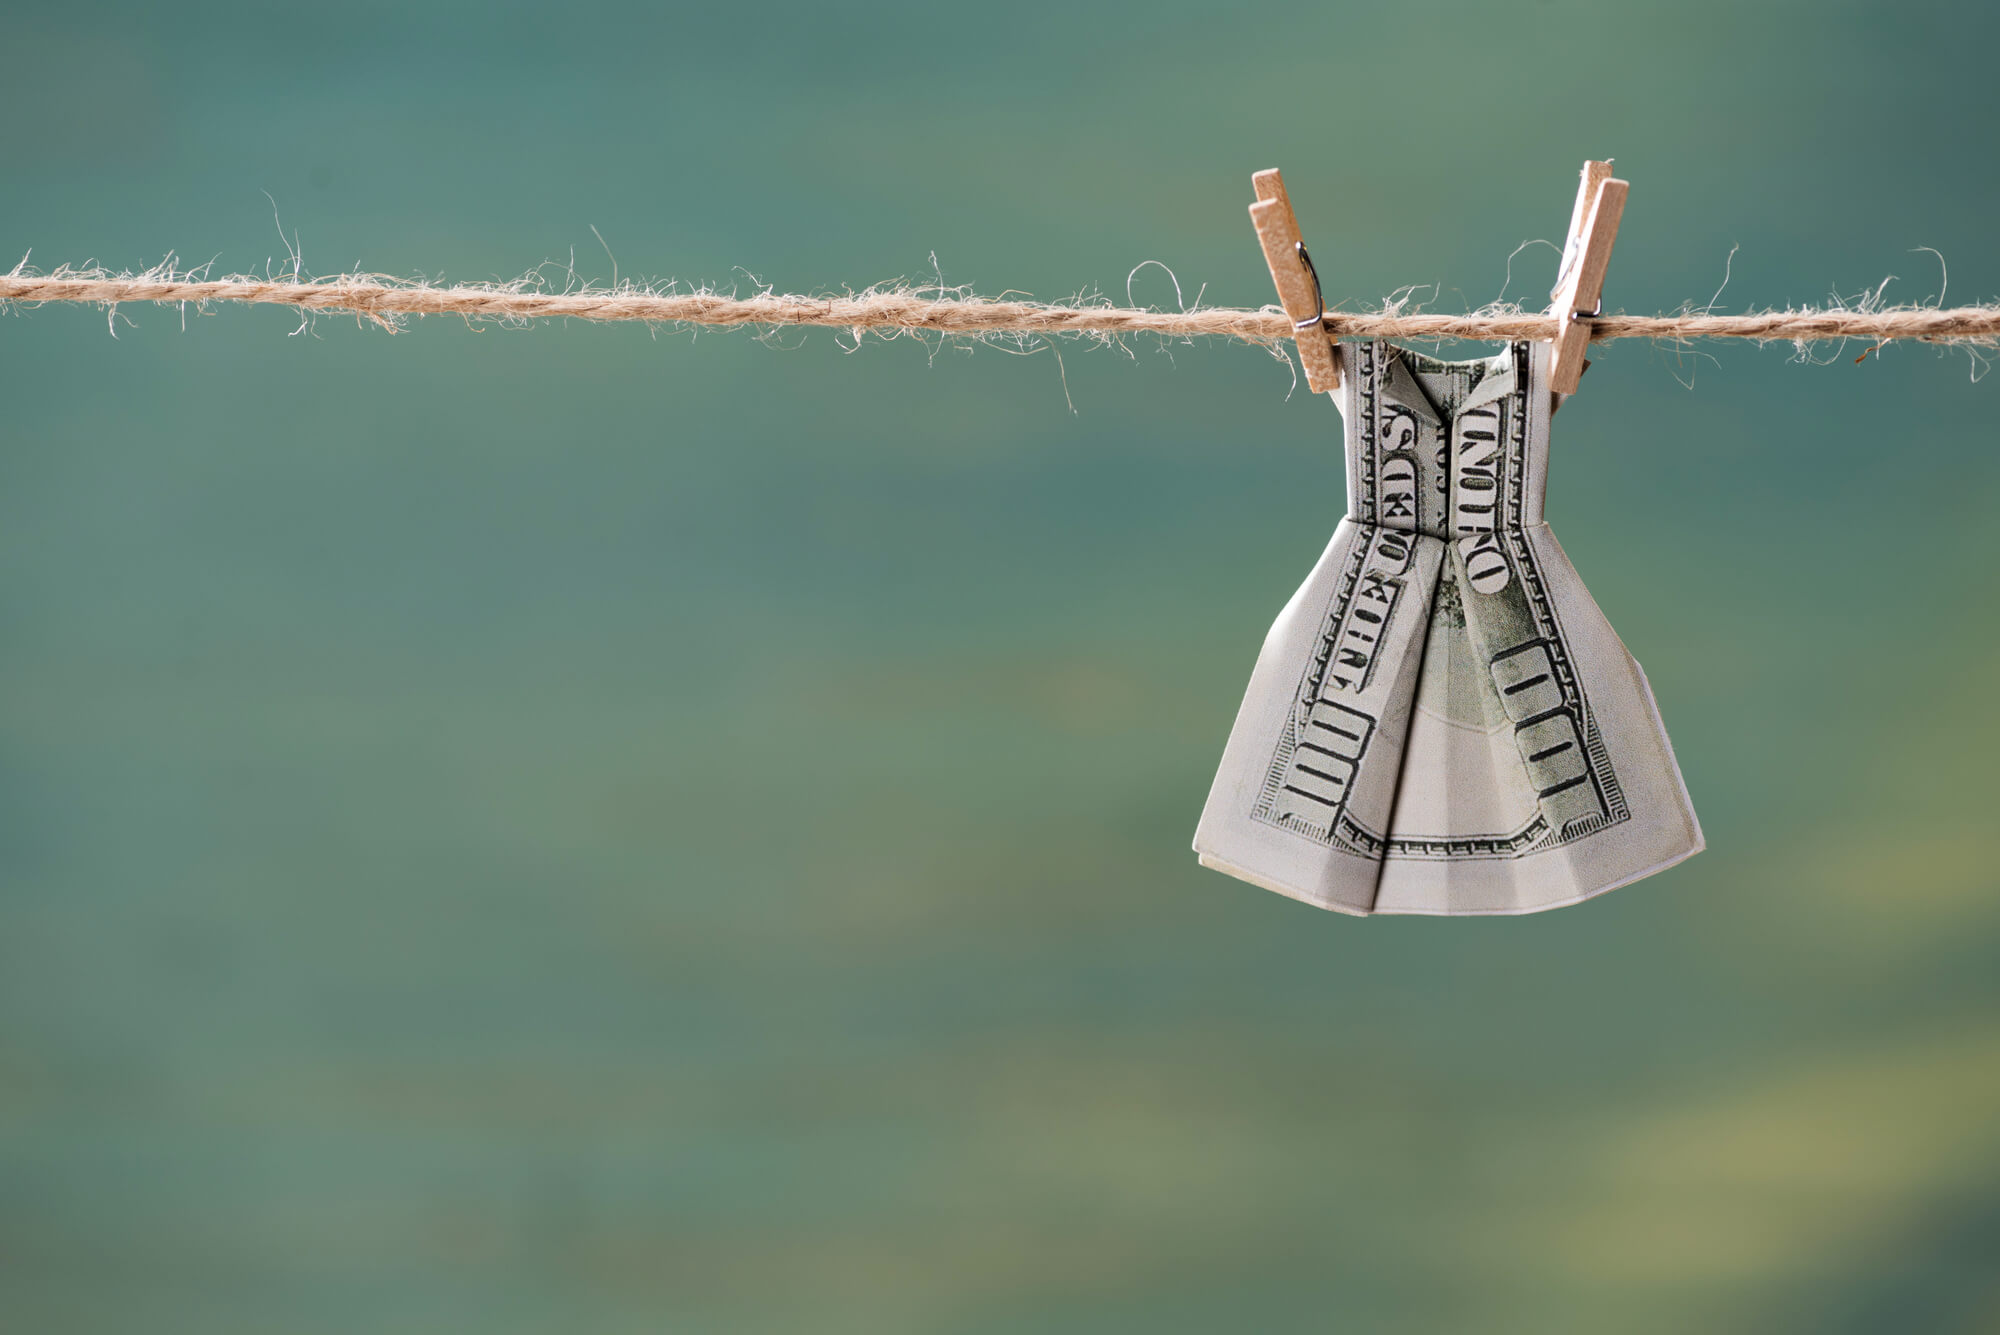 dollar bill folded into shape of dress and hanging on clothesline